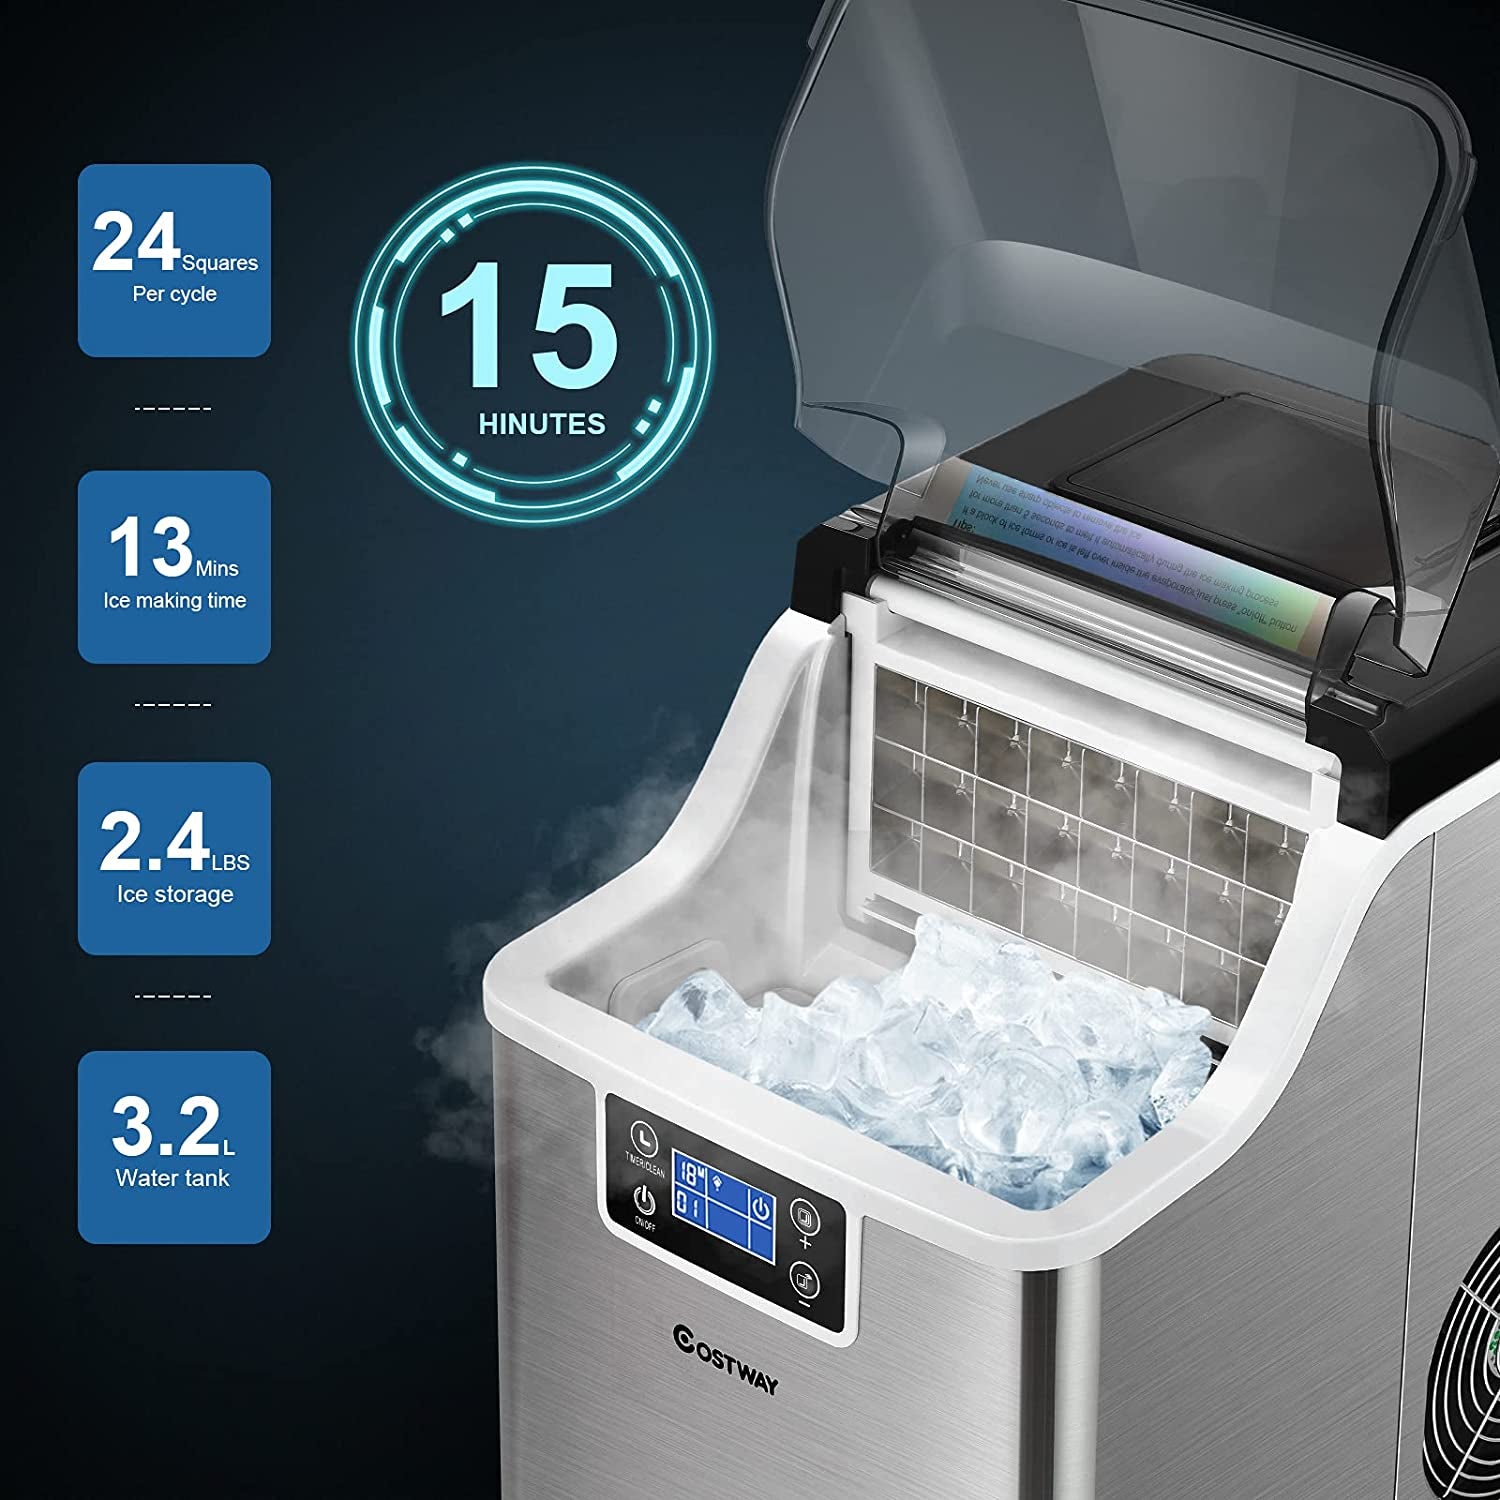 Portable Countertop Ice Maker with Auto Self-Cleaning Function, Rapid Ice Production - 40LBS/24H, Top Inlet Hole, Includes Ice Scoop and Basket - Ideal for Home, Office, and Party Use